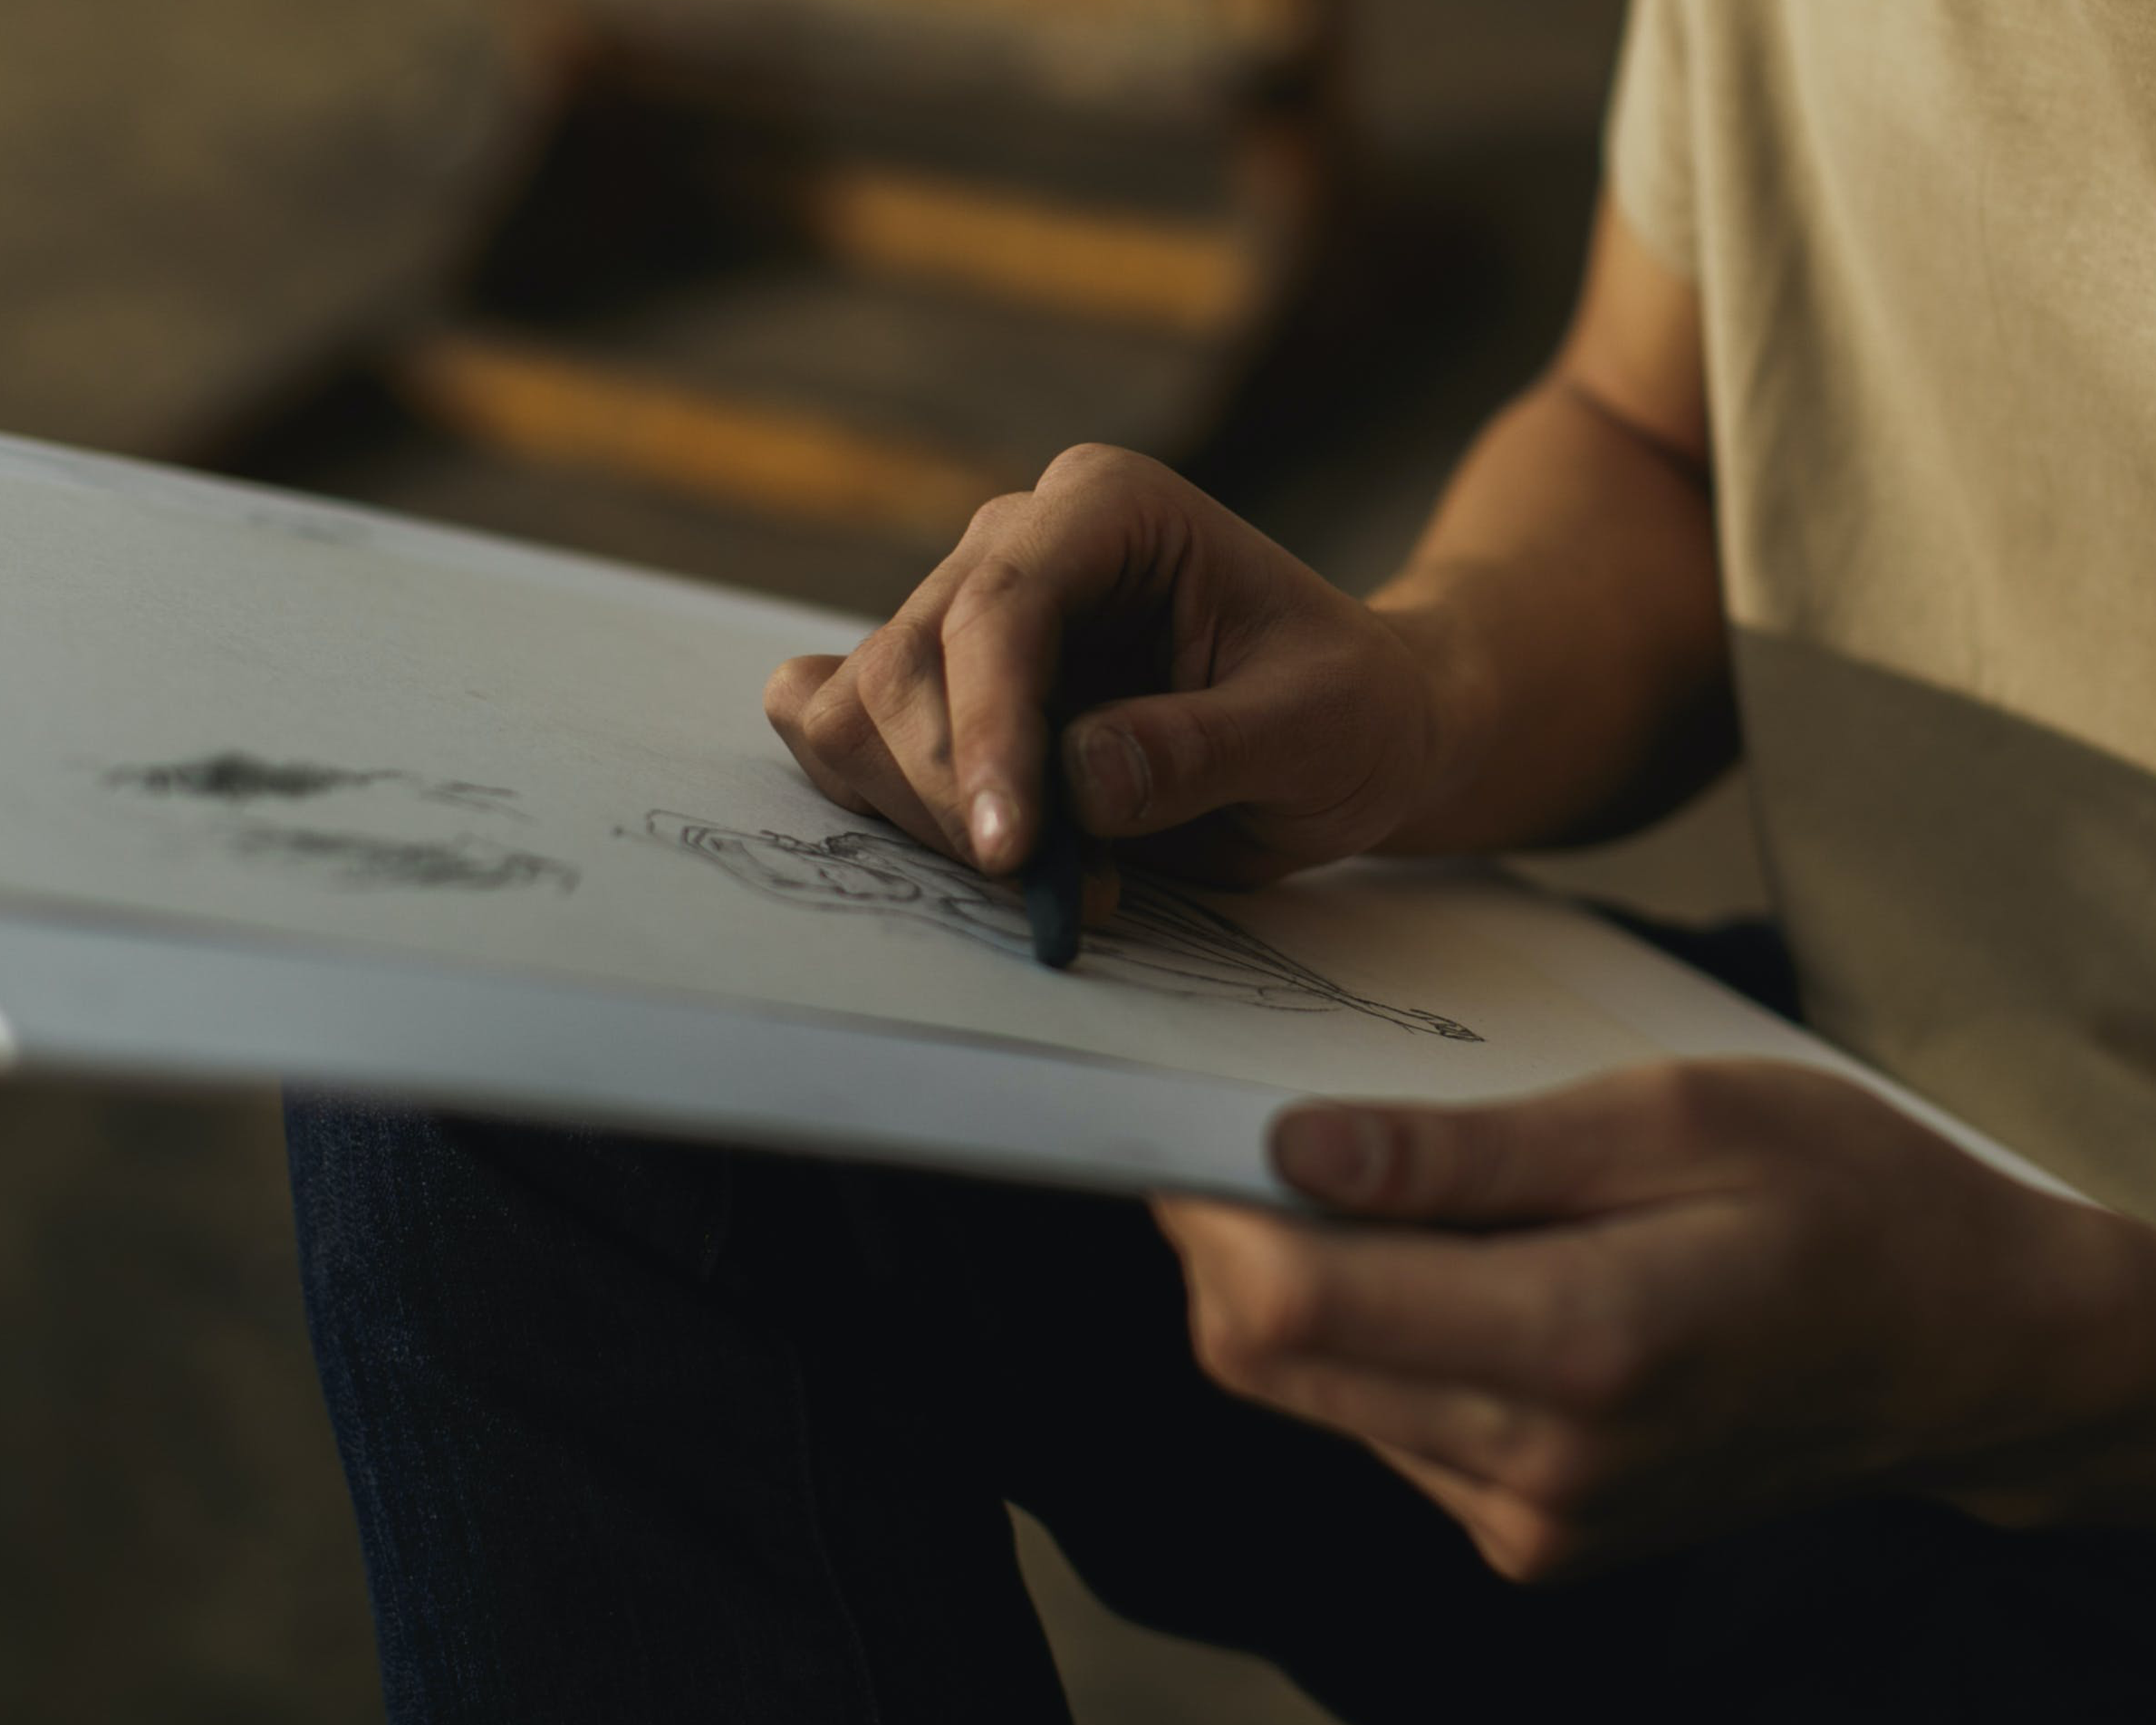 An image of a person drawing with charcoal on paper.